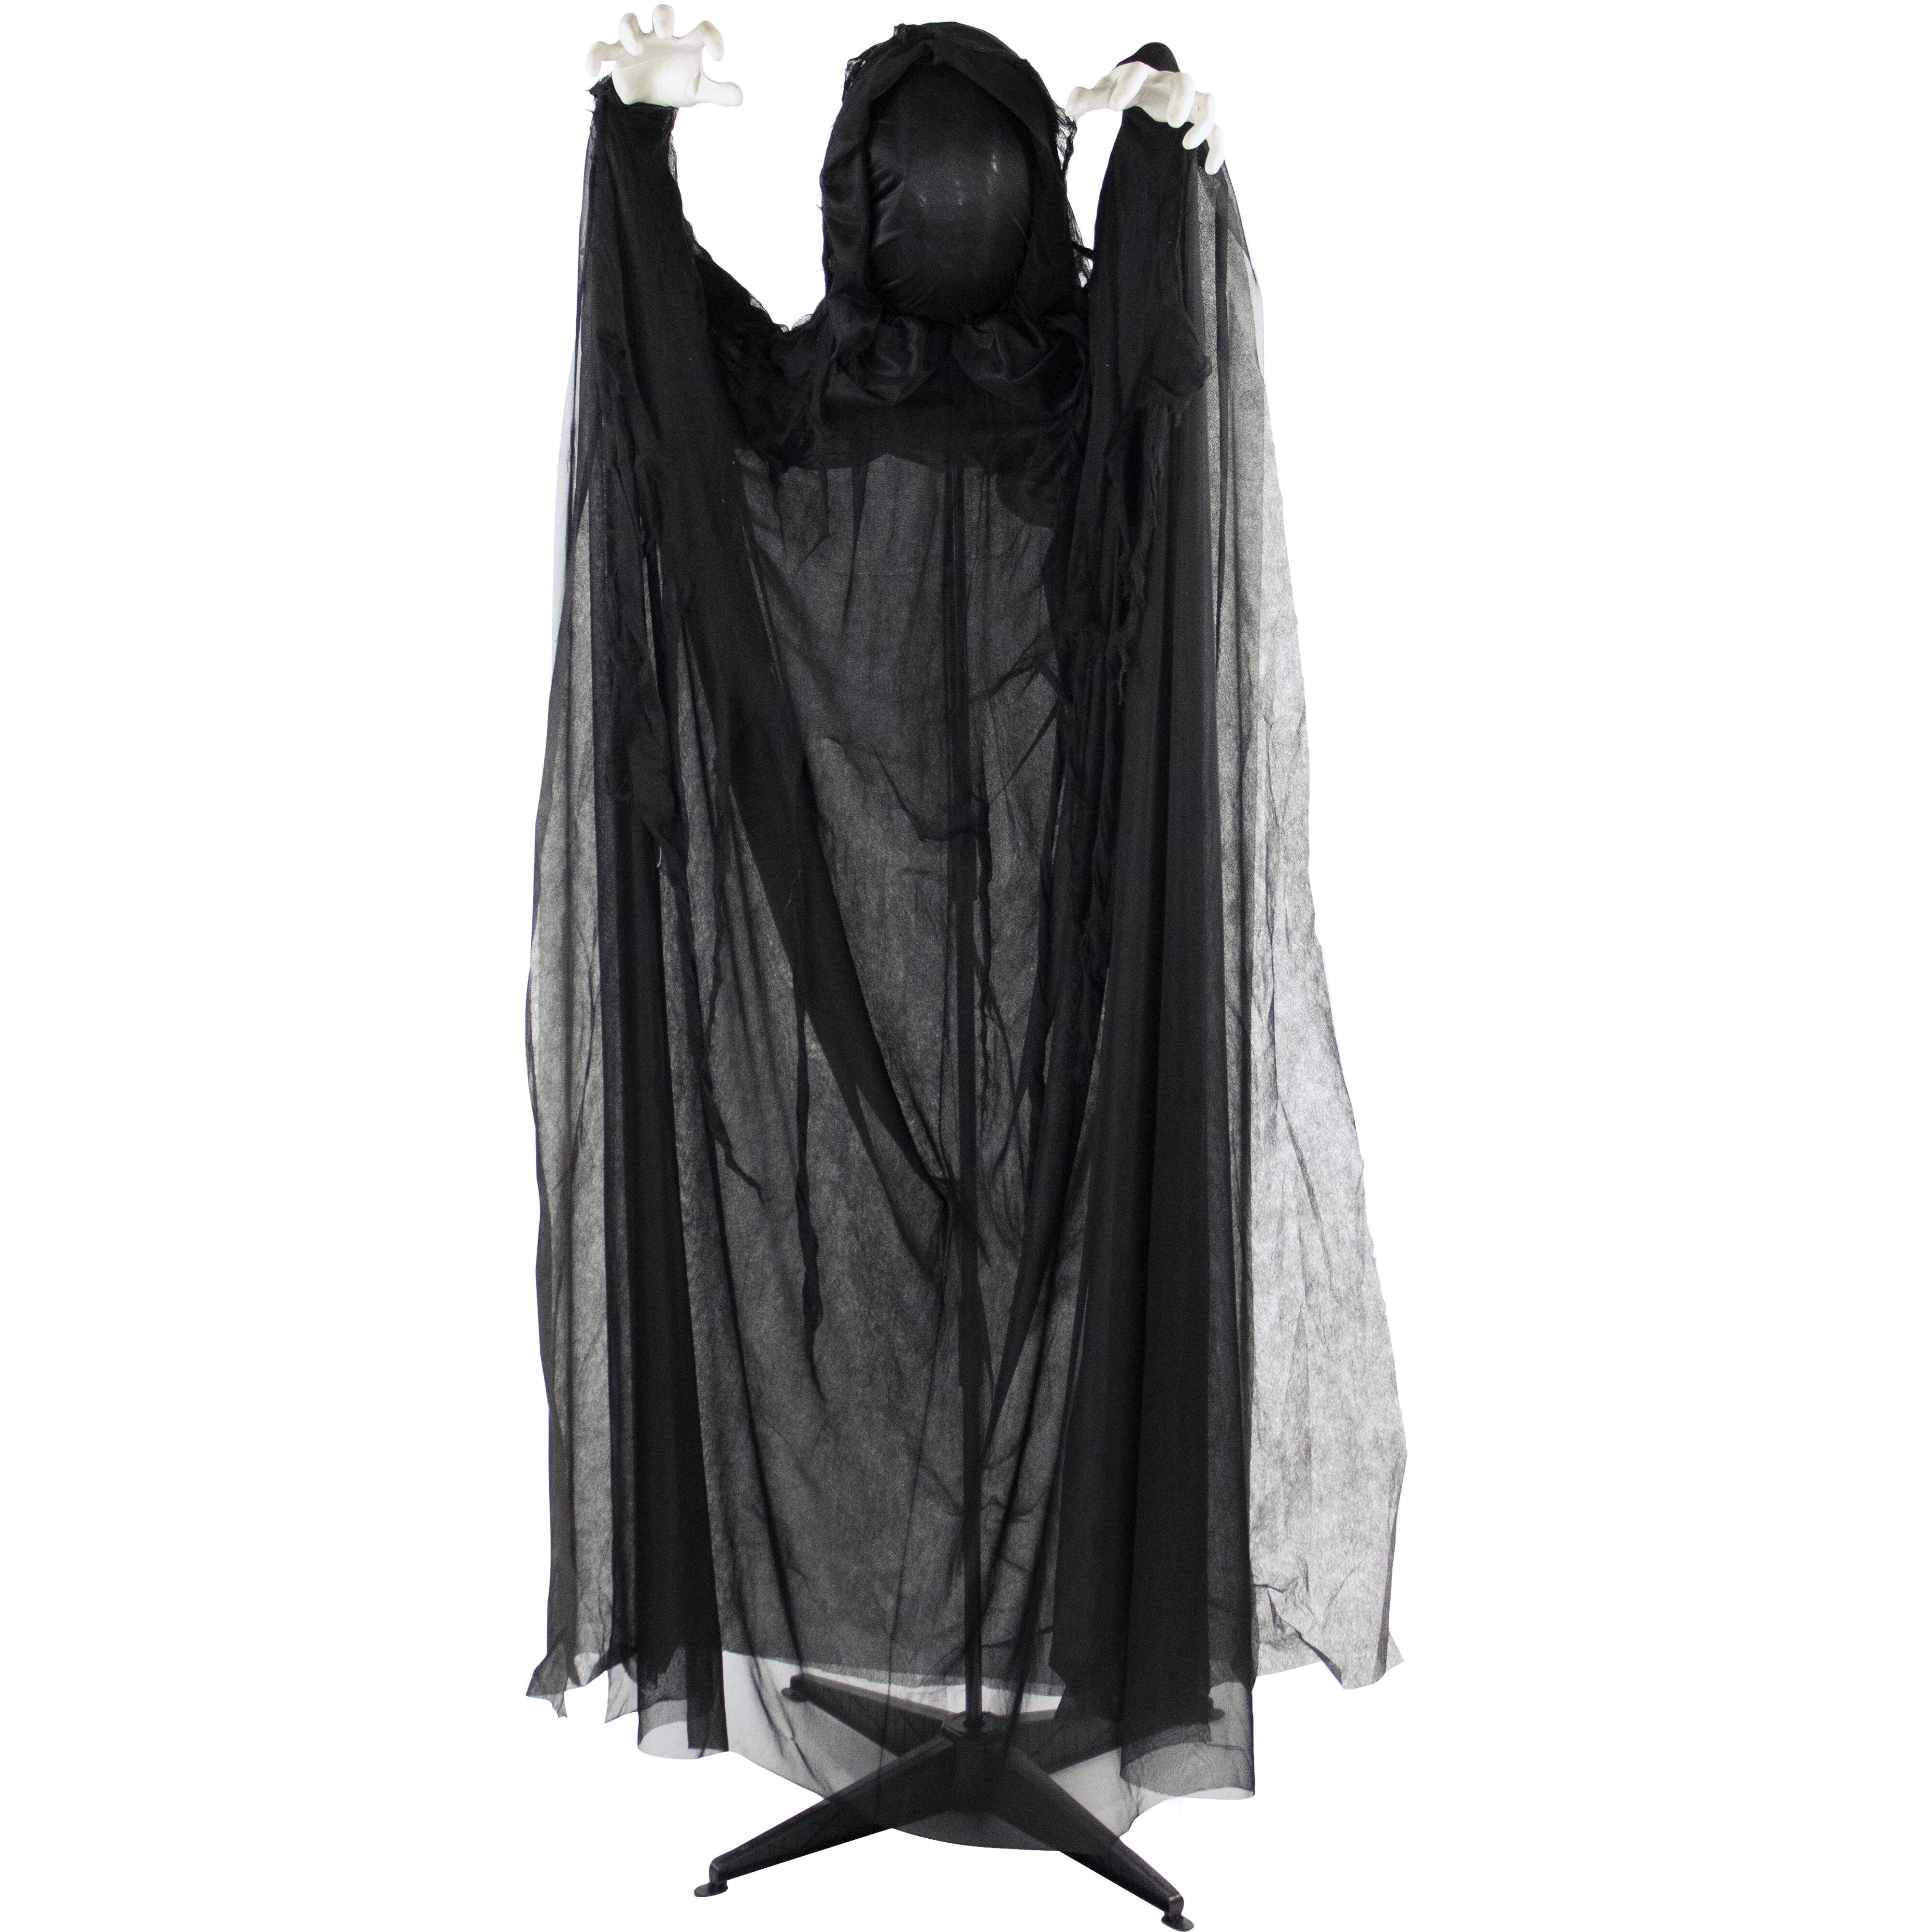 Haunted Hill Farm -  65-In. Animatronic Reaper, Indoor or Outdoor Halloween Decoration, Light-up Face, Poseable